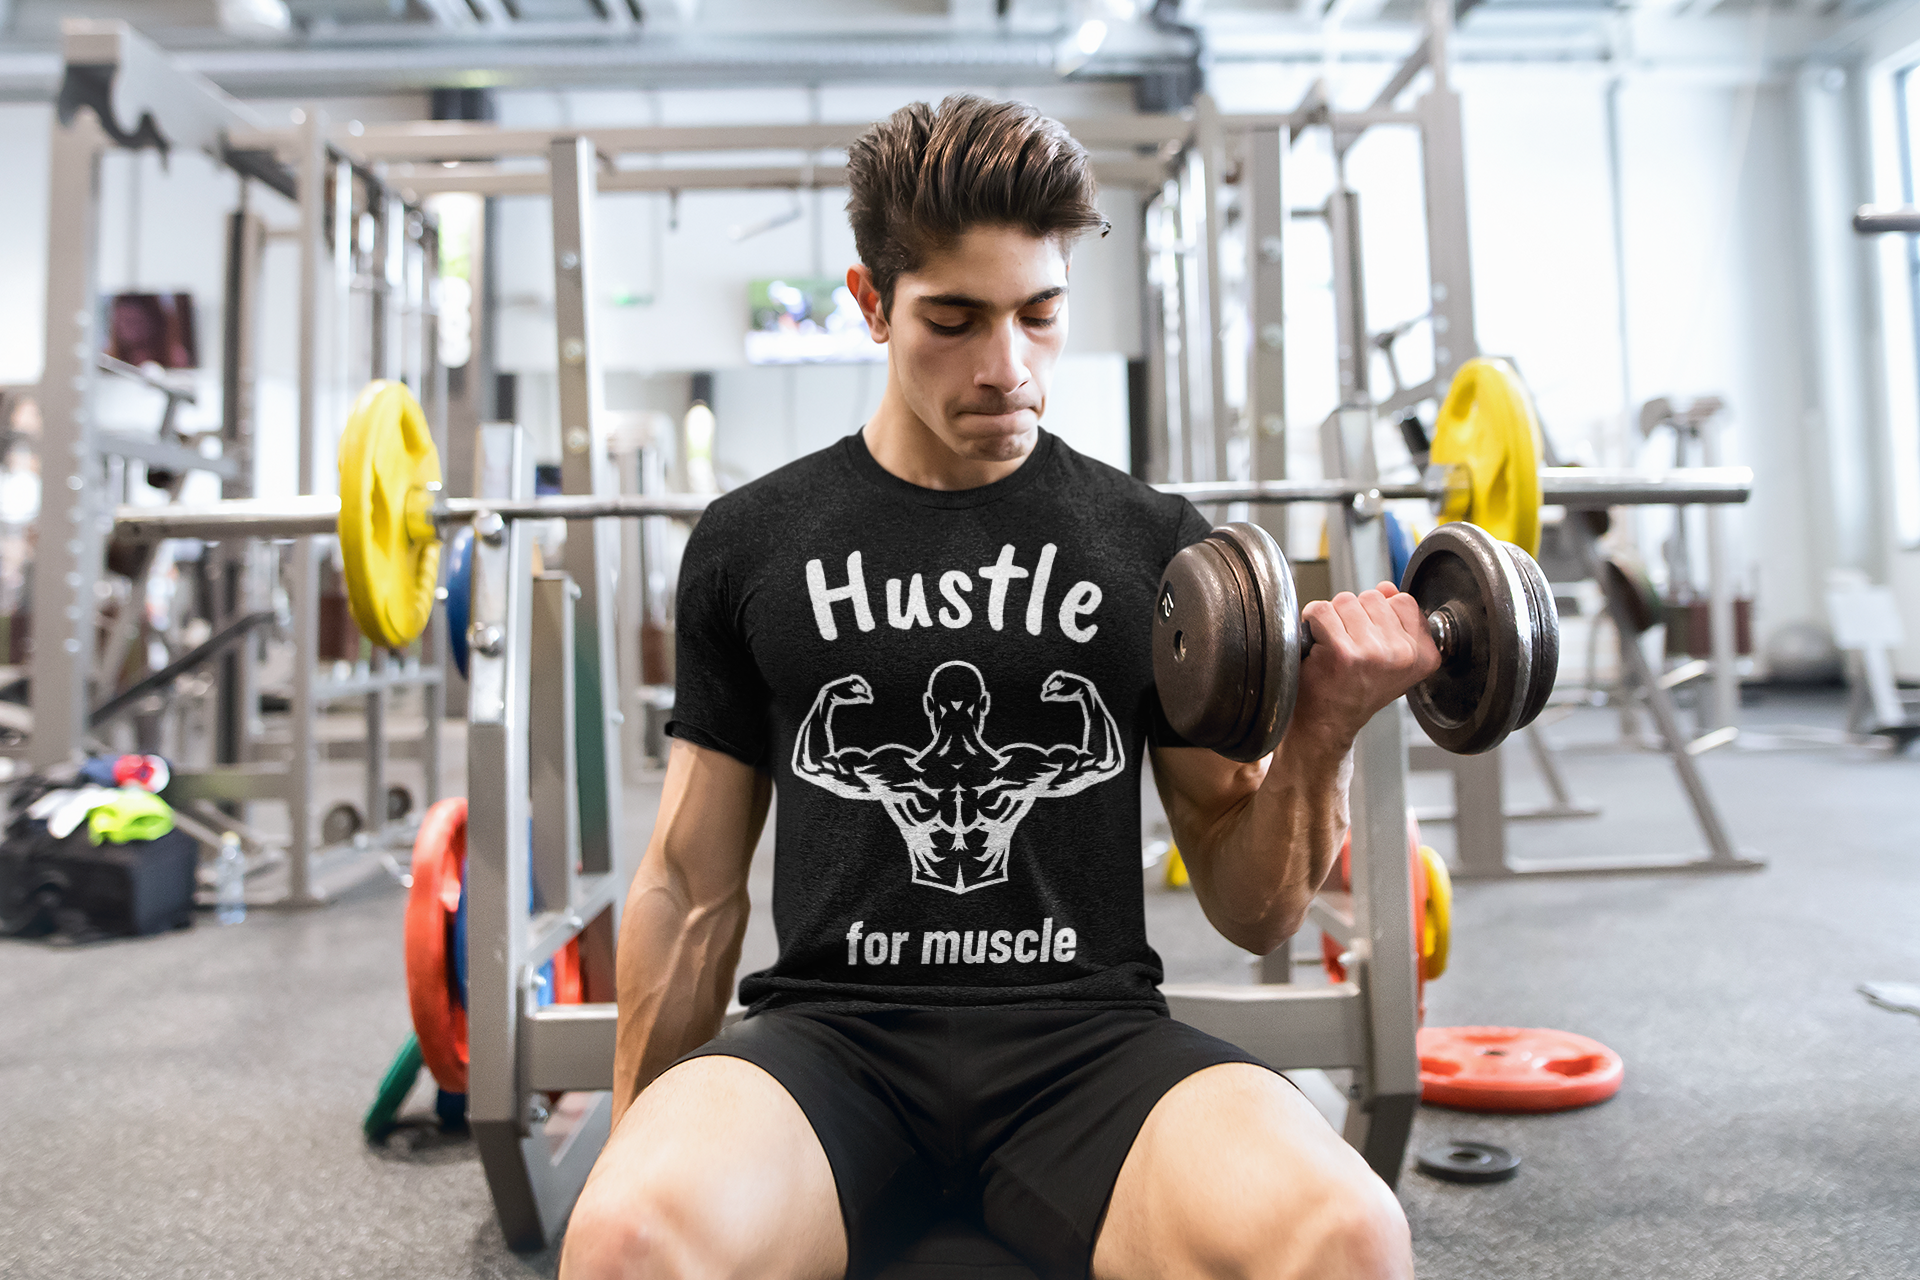 Hustle for muscle'